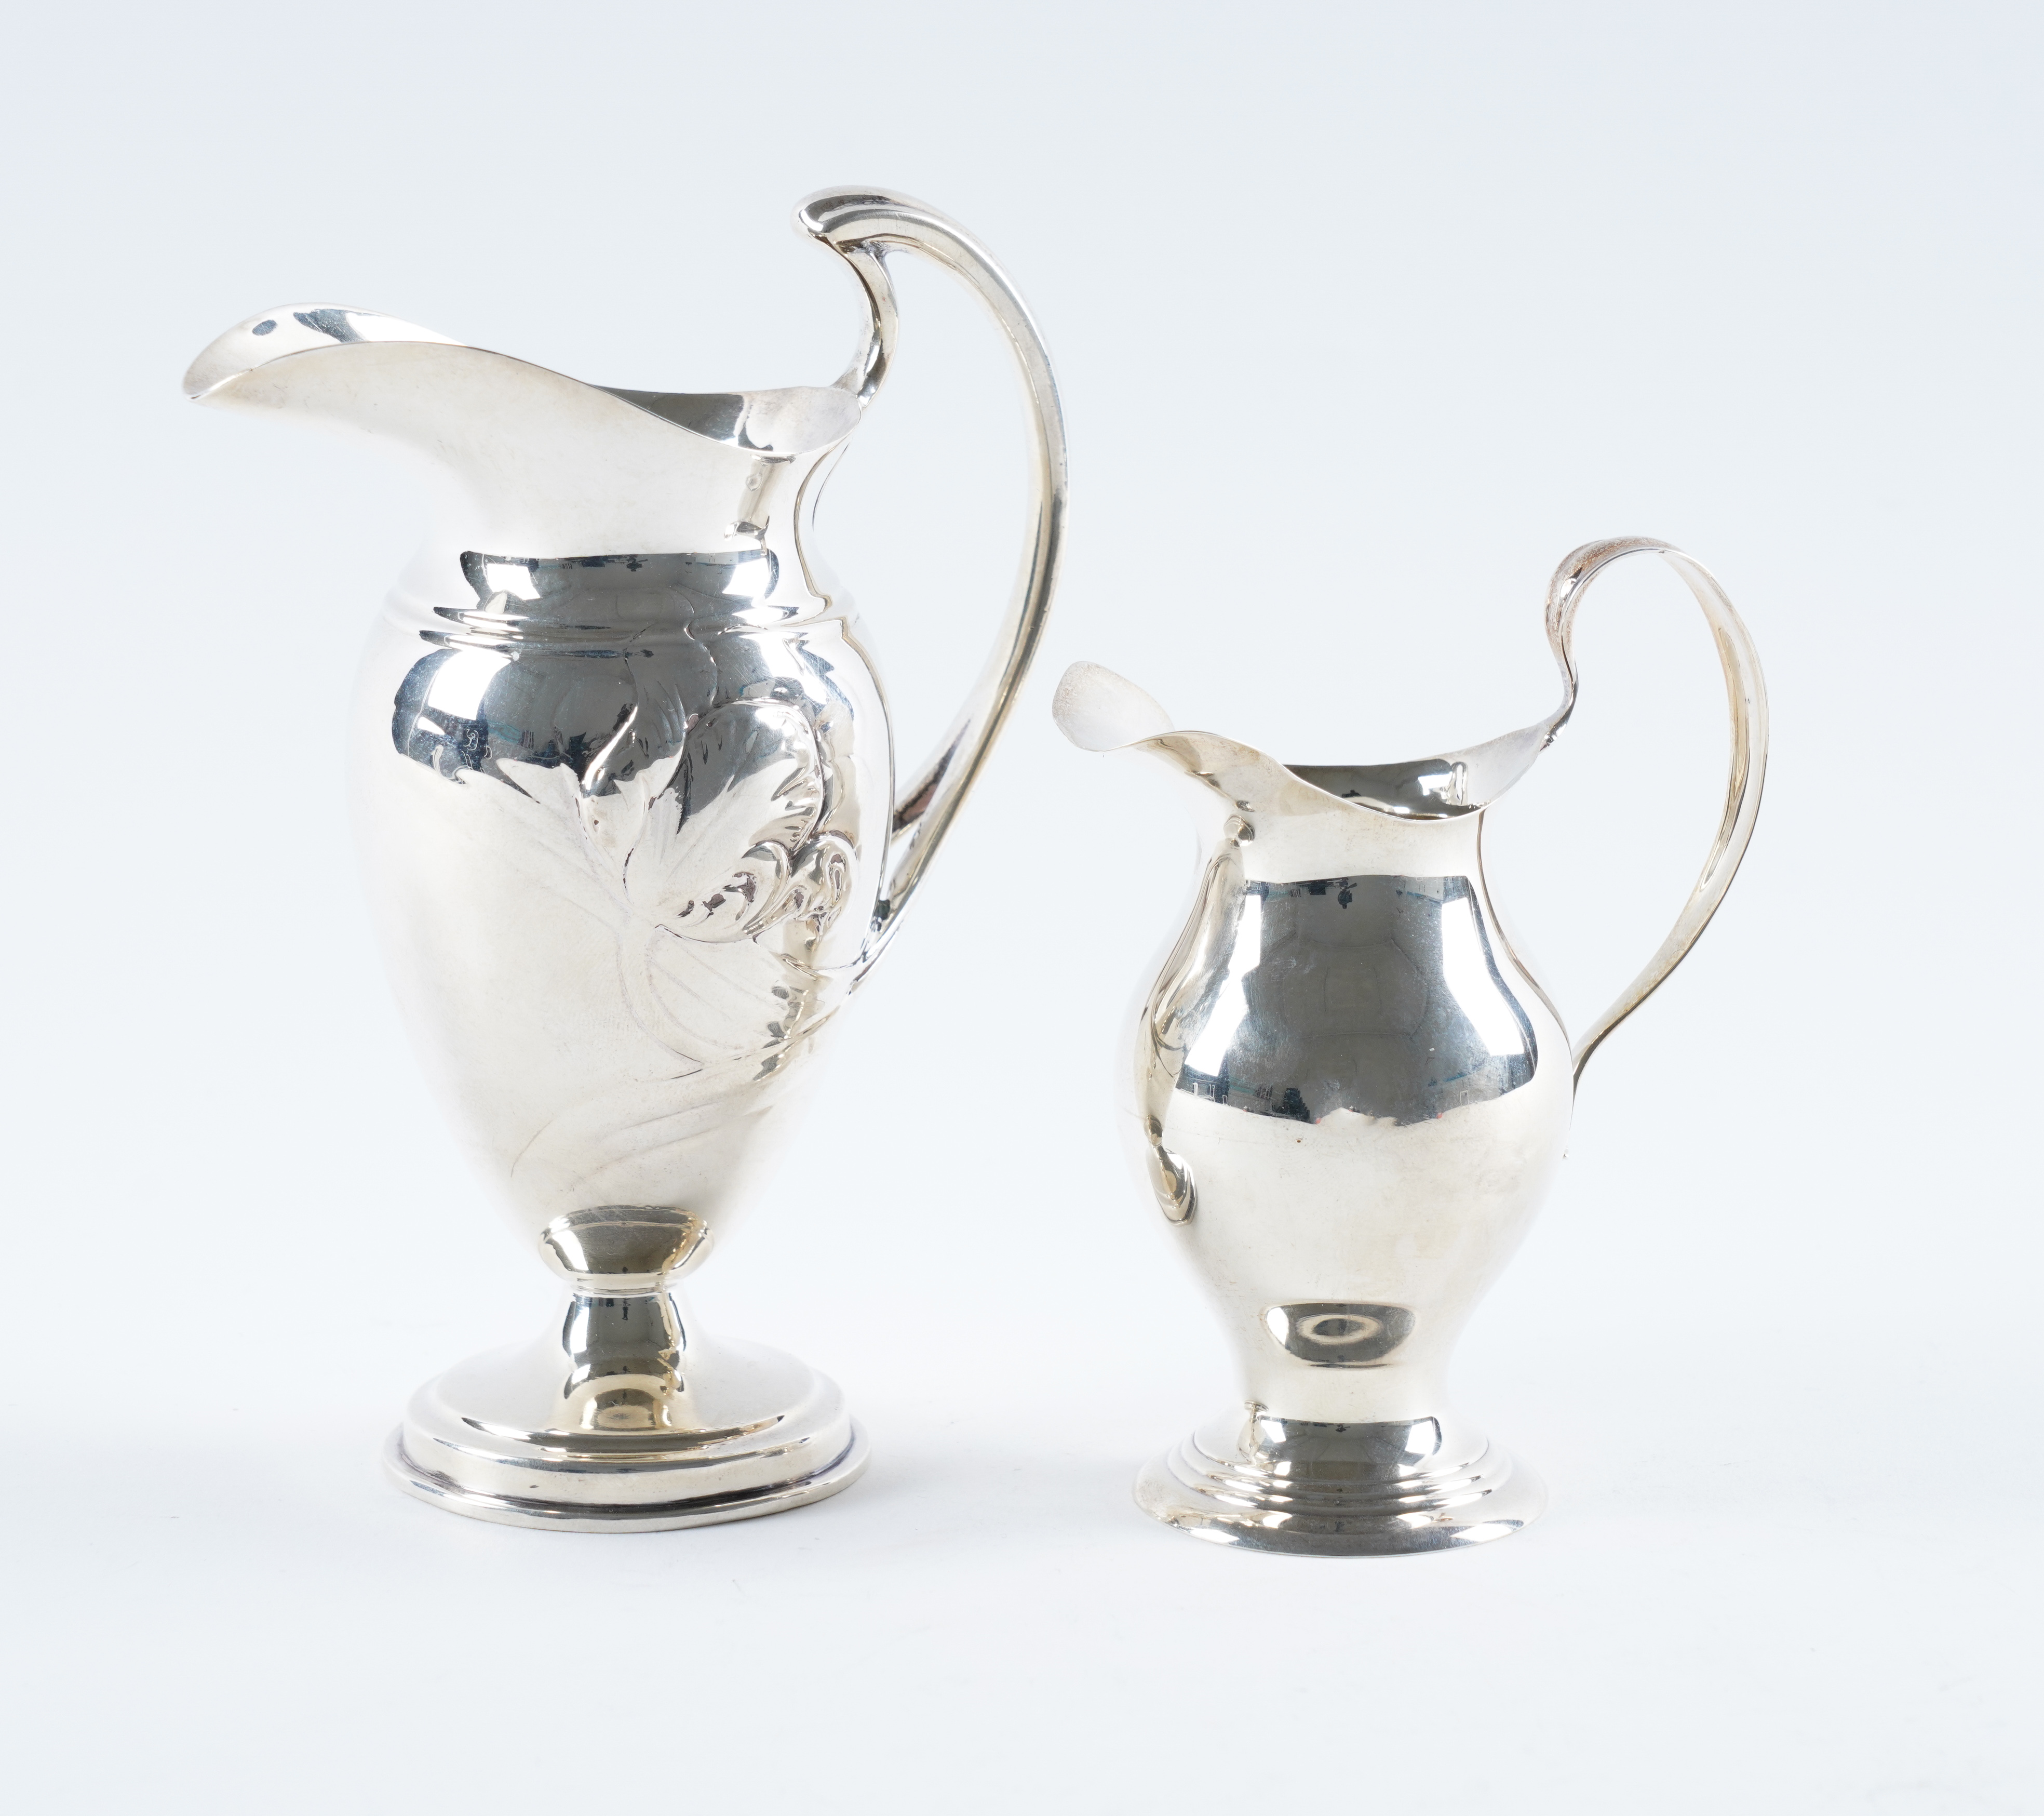 TWO SILVER CREAM JUGS 2 The larger 3ae5e5